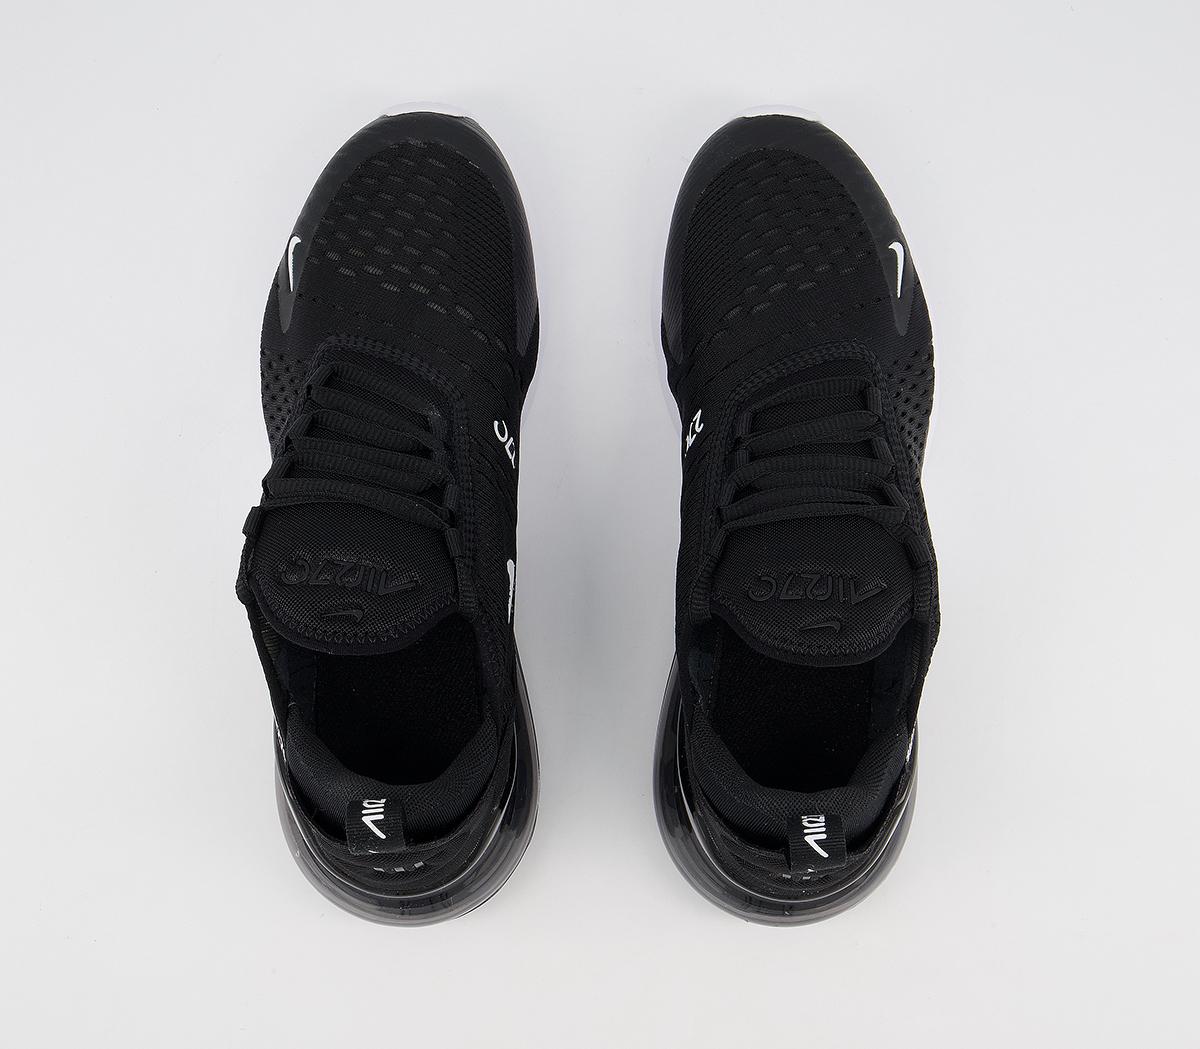 Nike Air Max 270 Gs Trainers Black White Anthracite - Unisex